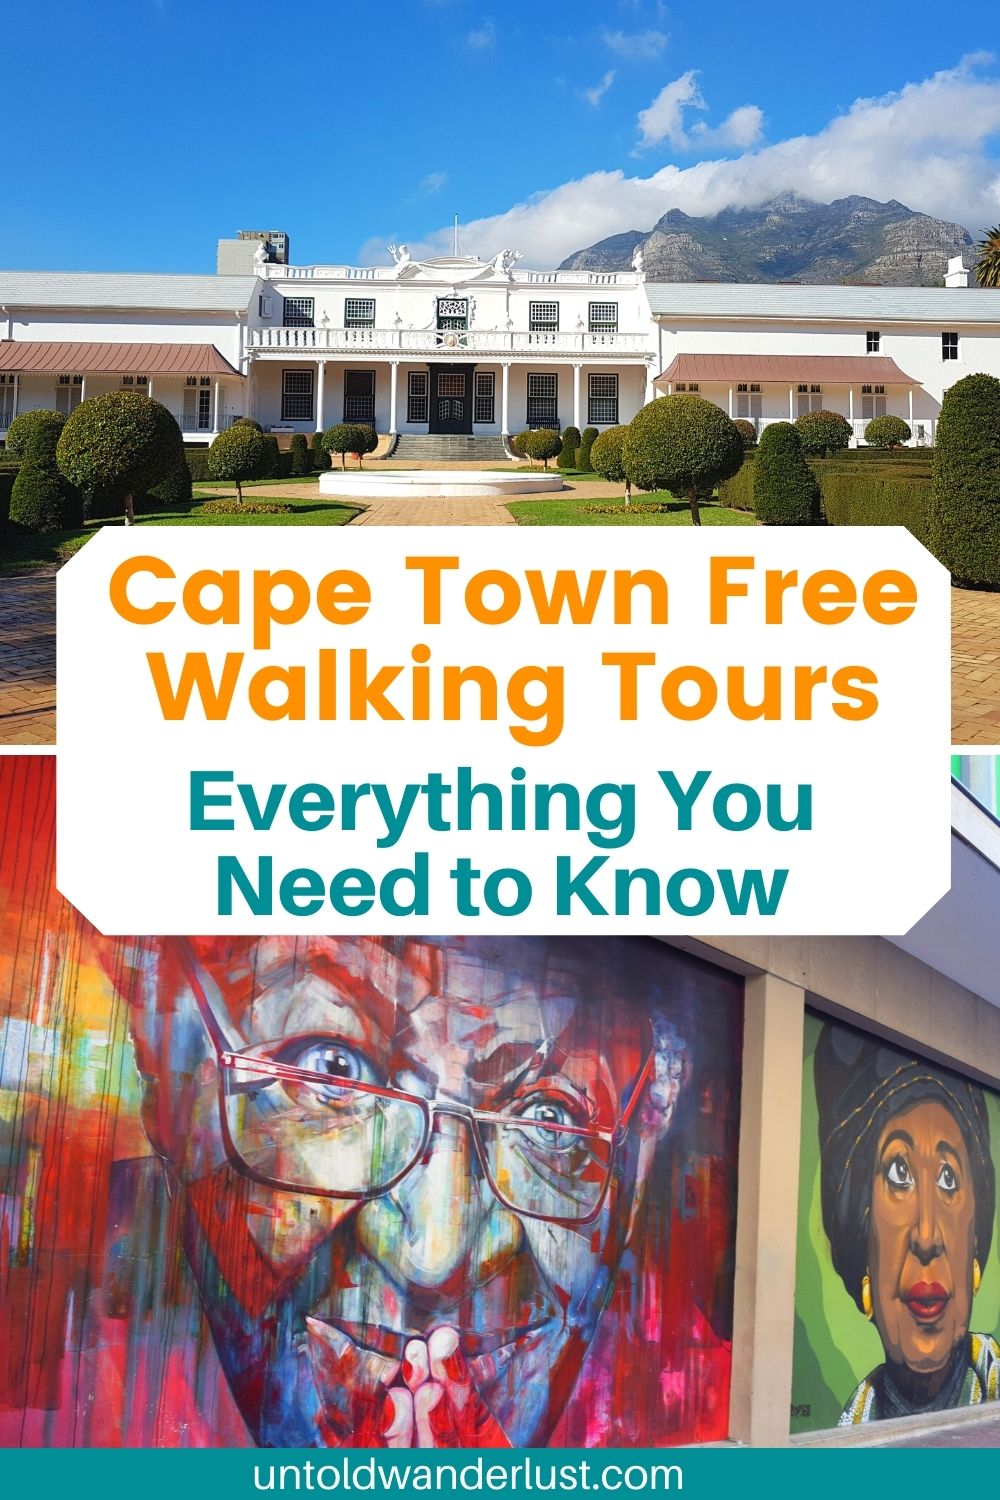 Cape Town Free Walking Tours | Everything You Need to Know